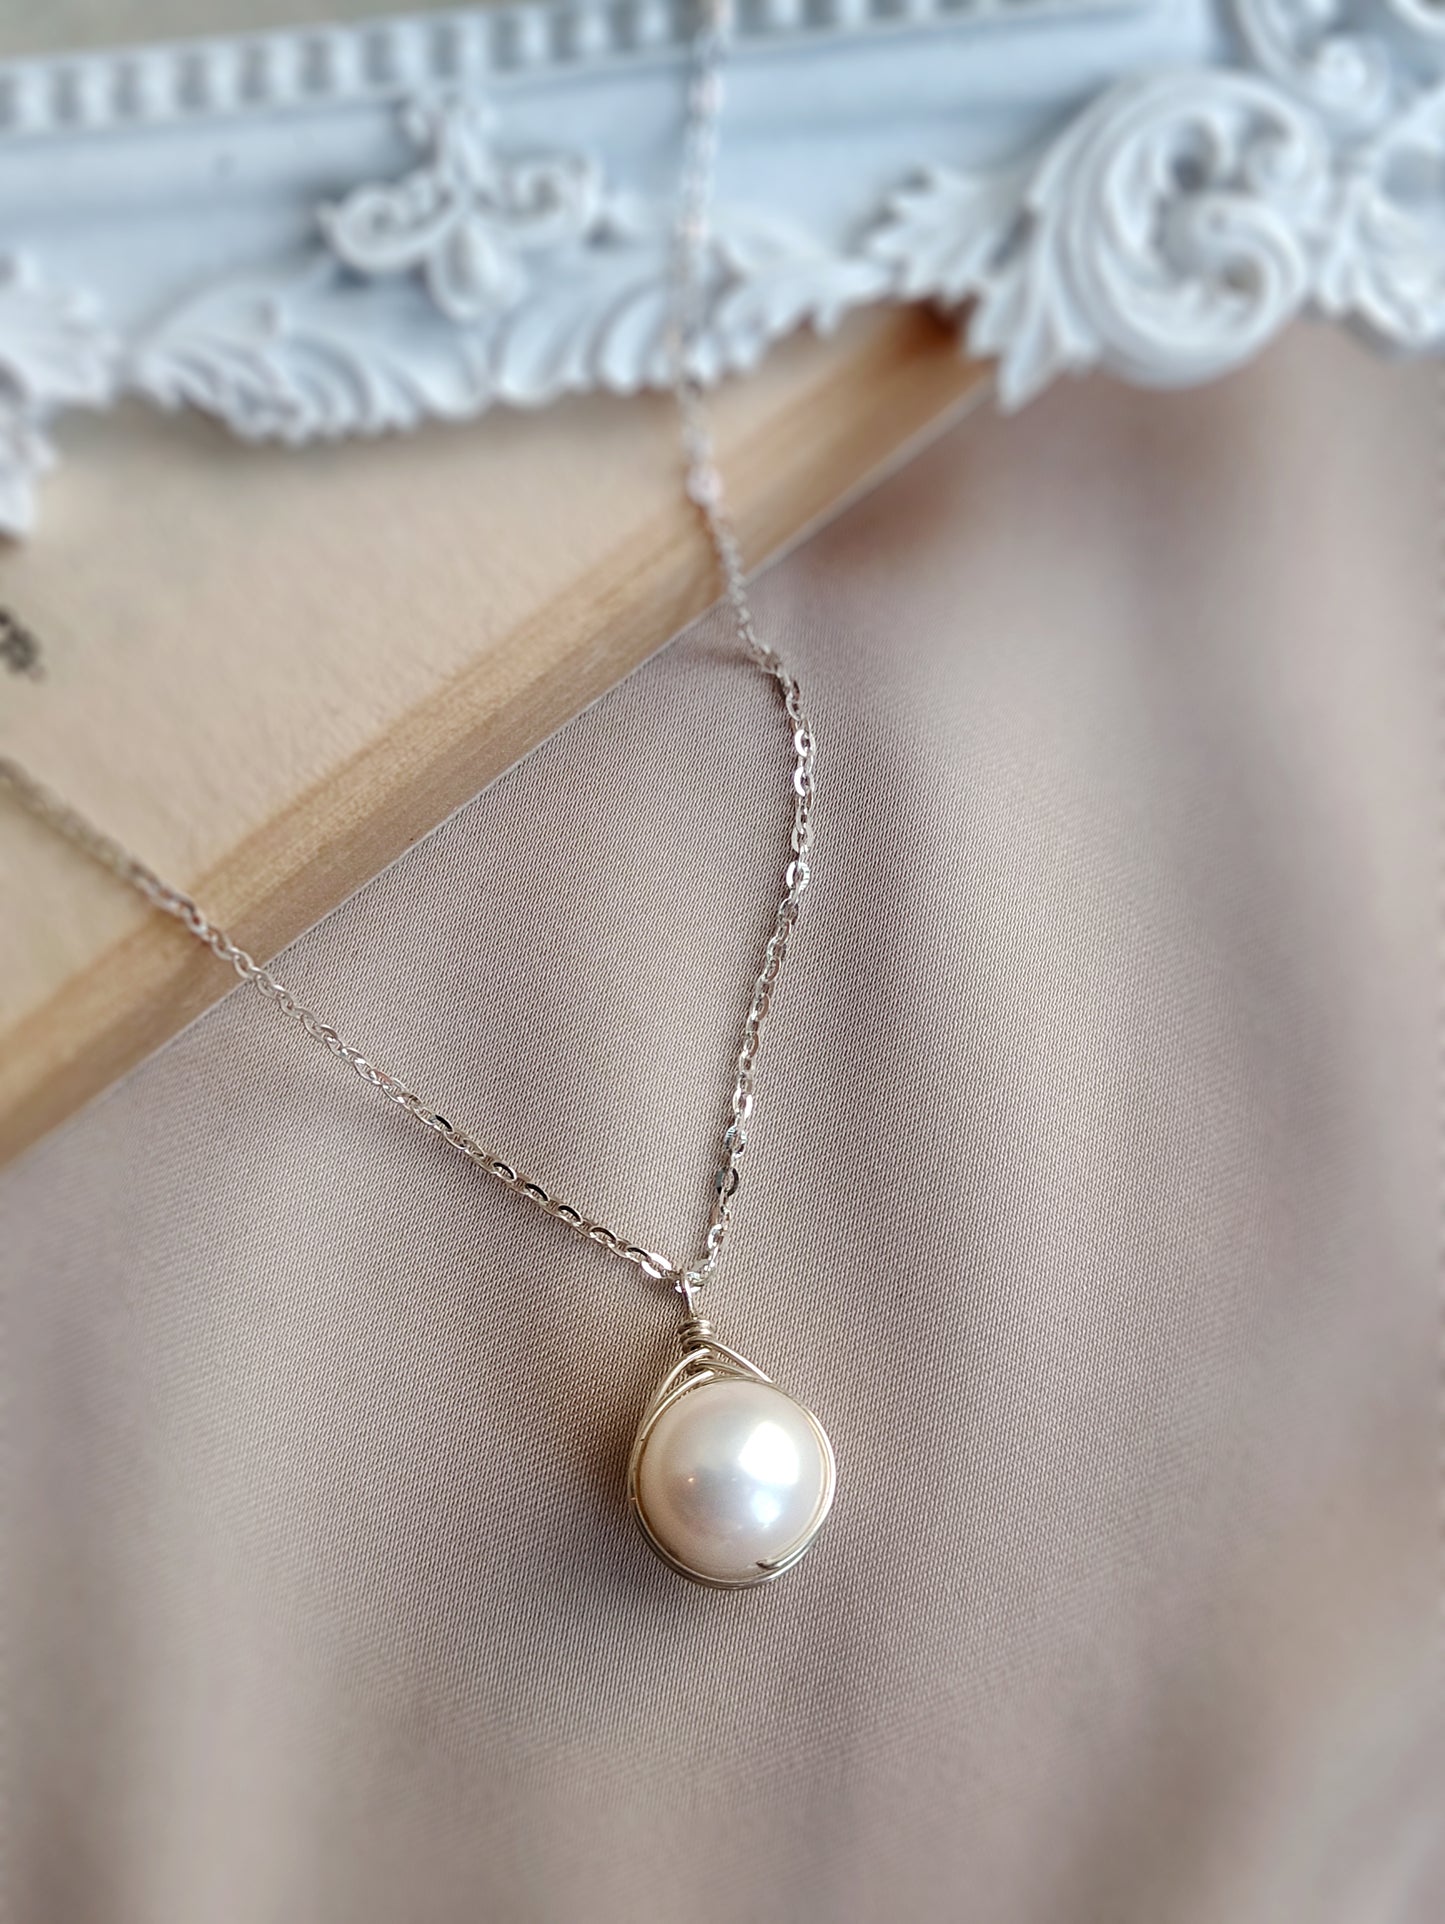 White Pearl Earrings and Necklace Set, Dainty Pearl Jewelry Set, Wedding Jewelry Set